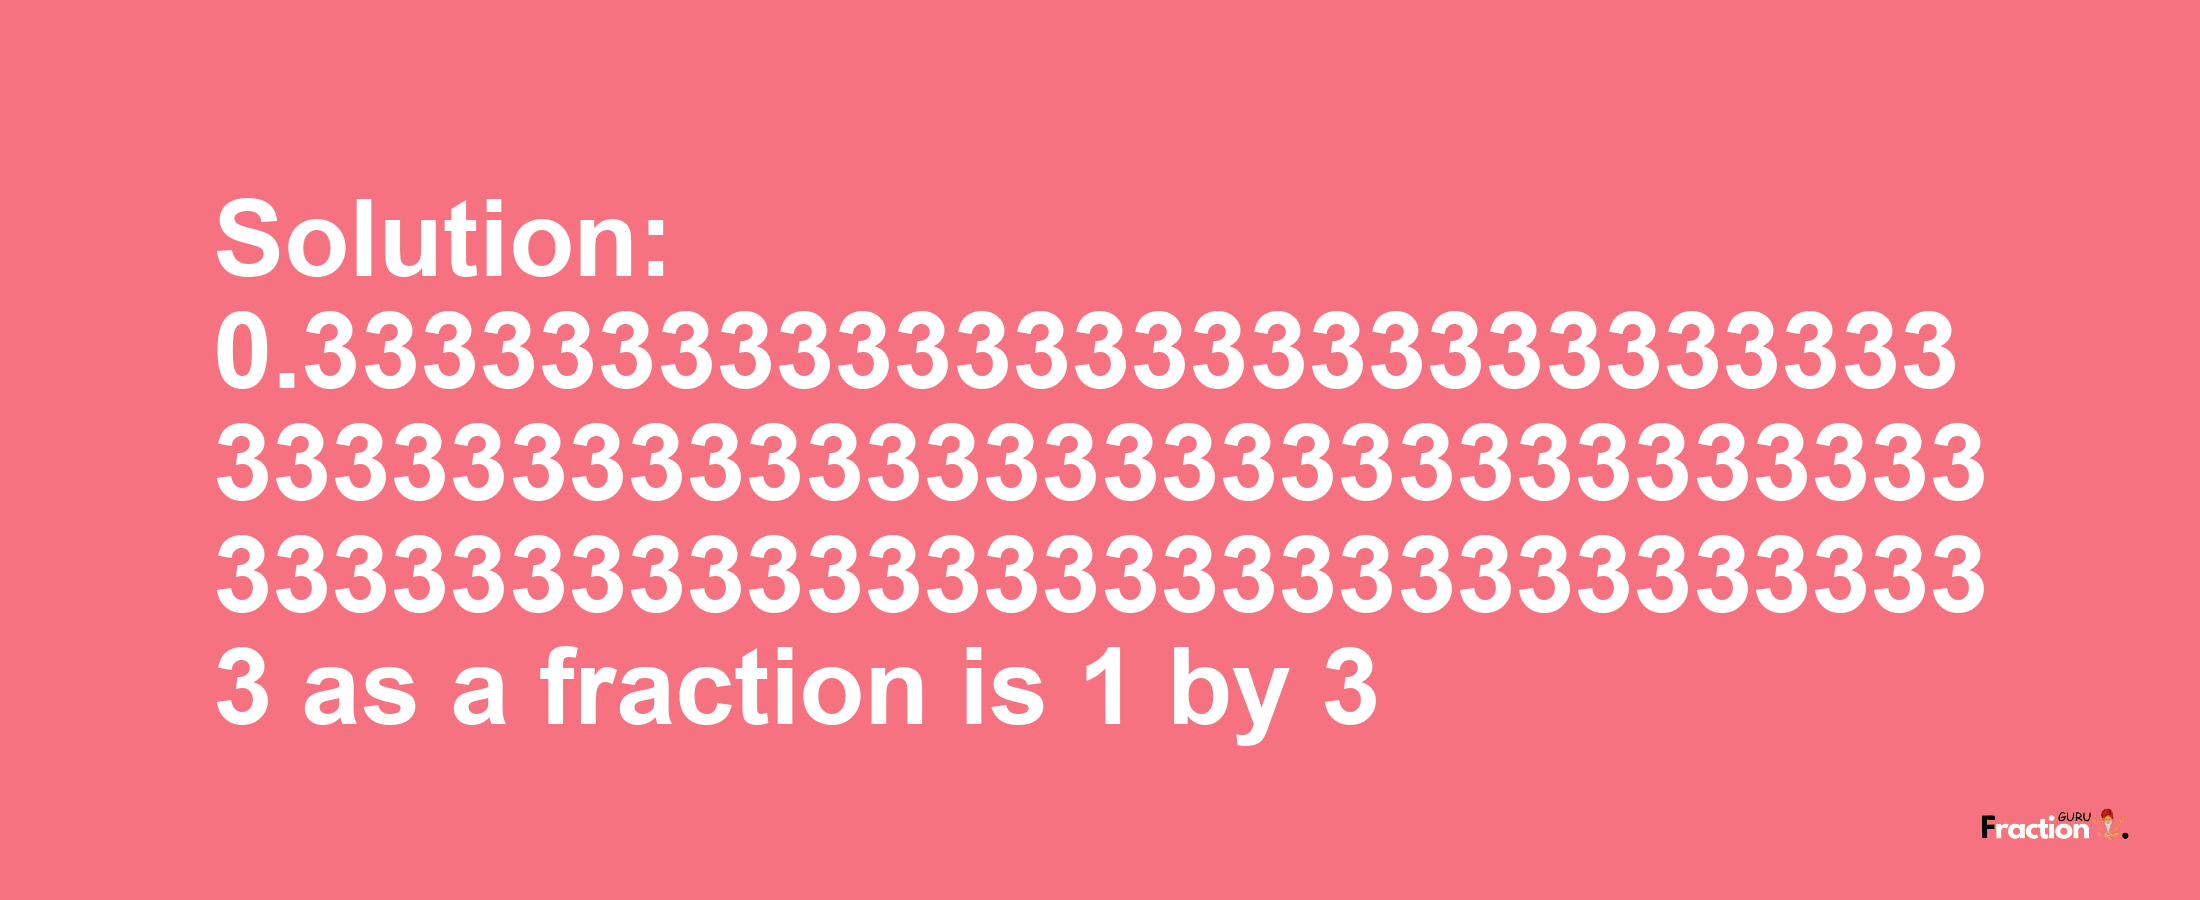 Solution:0.33333333333333333333333333333333333333333333333333333333333333333333333333333333333333333 as a fraction is 1/3